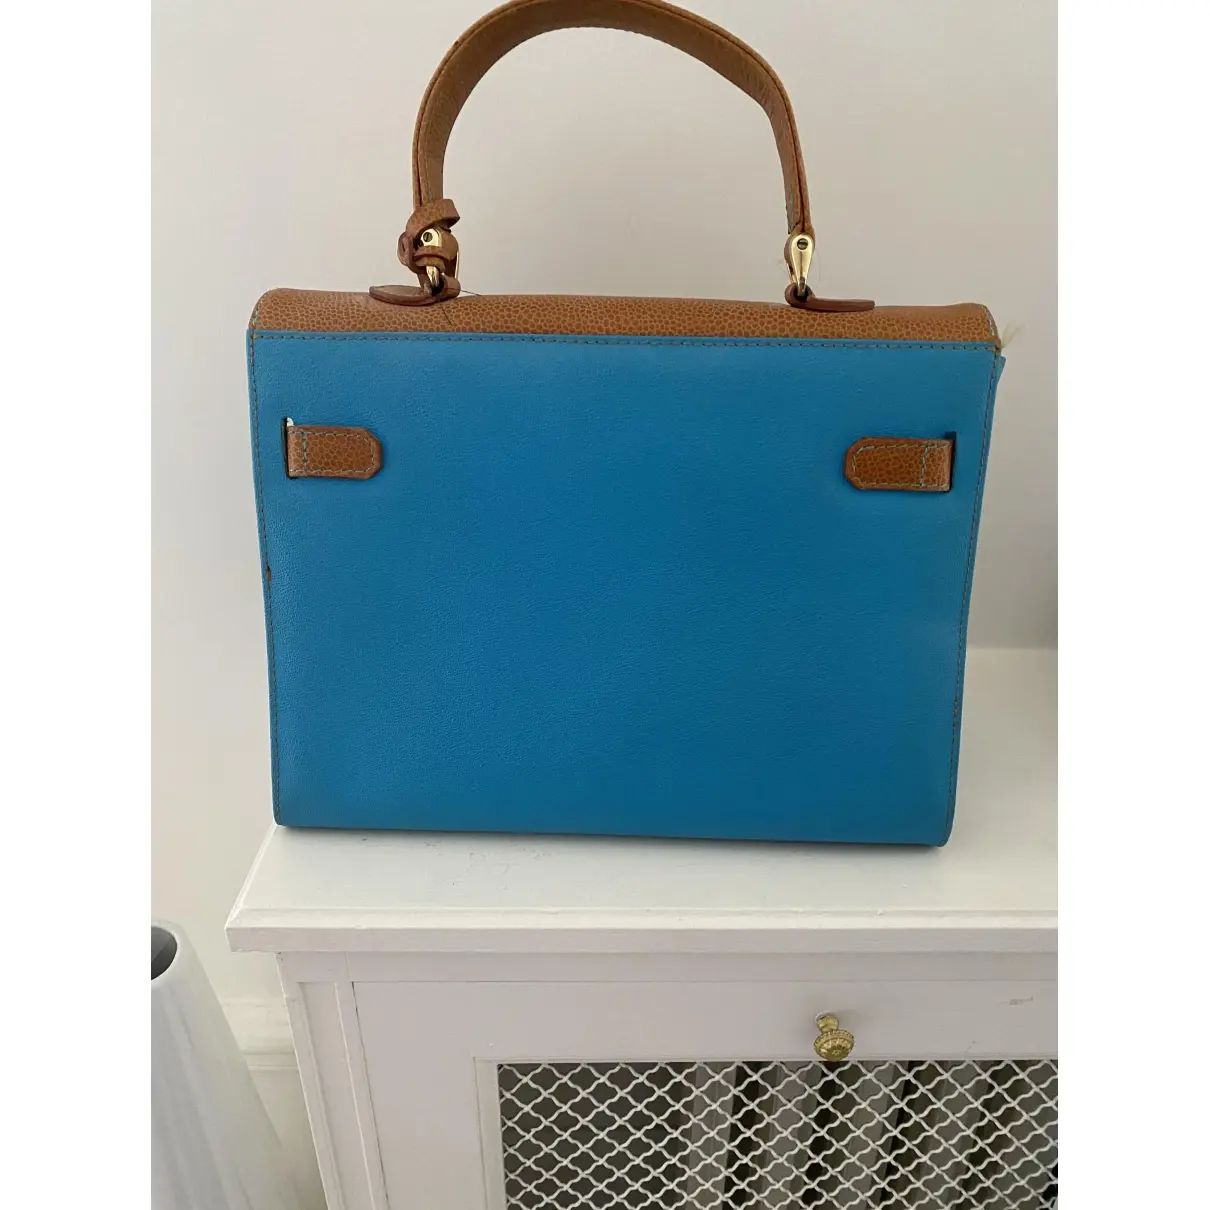 Buy A Piece Of Chic Leather handbag online